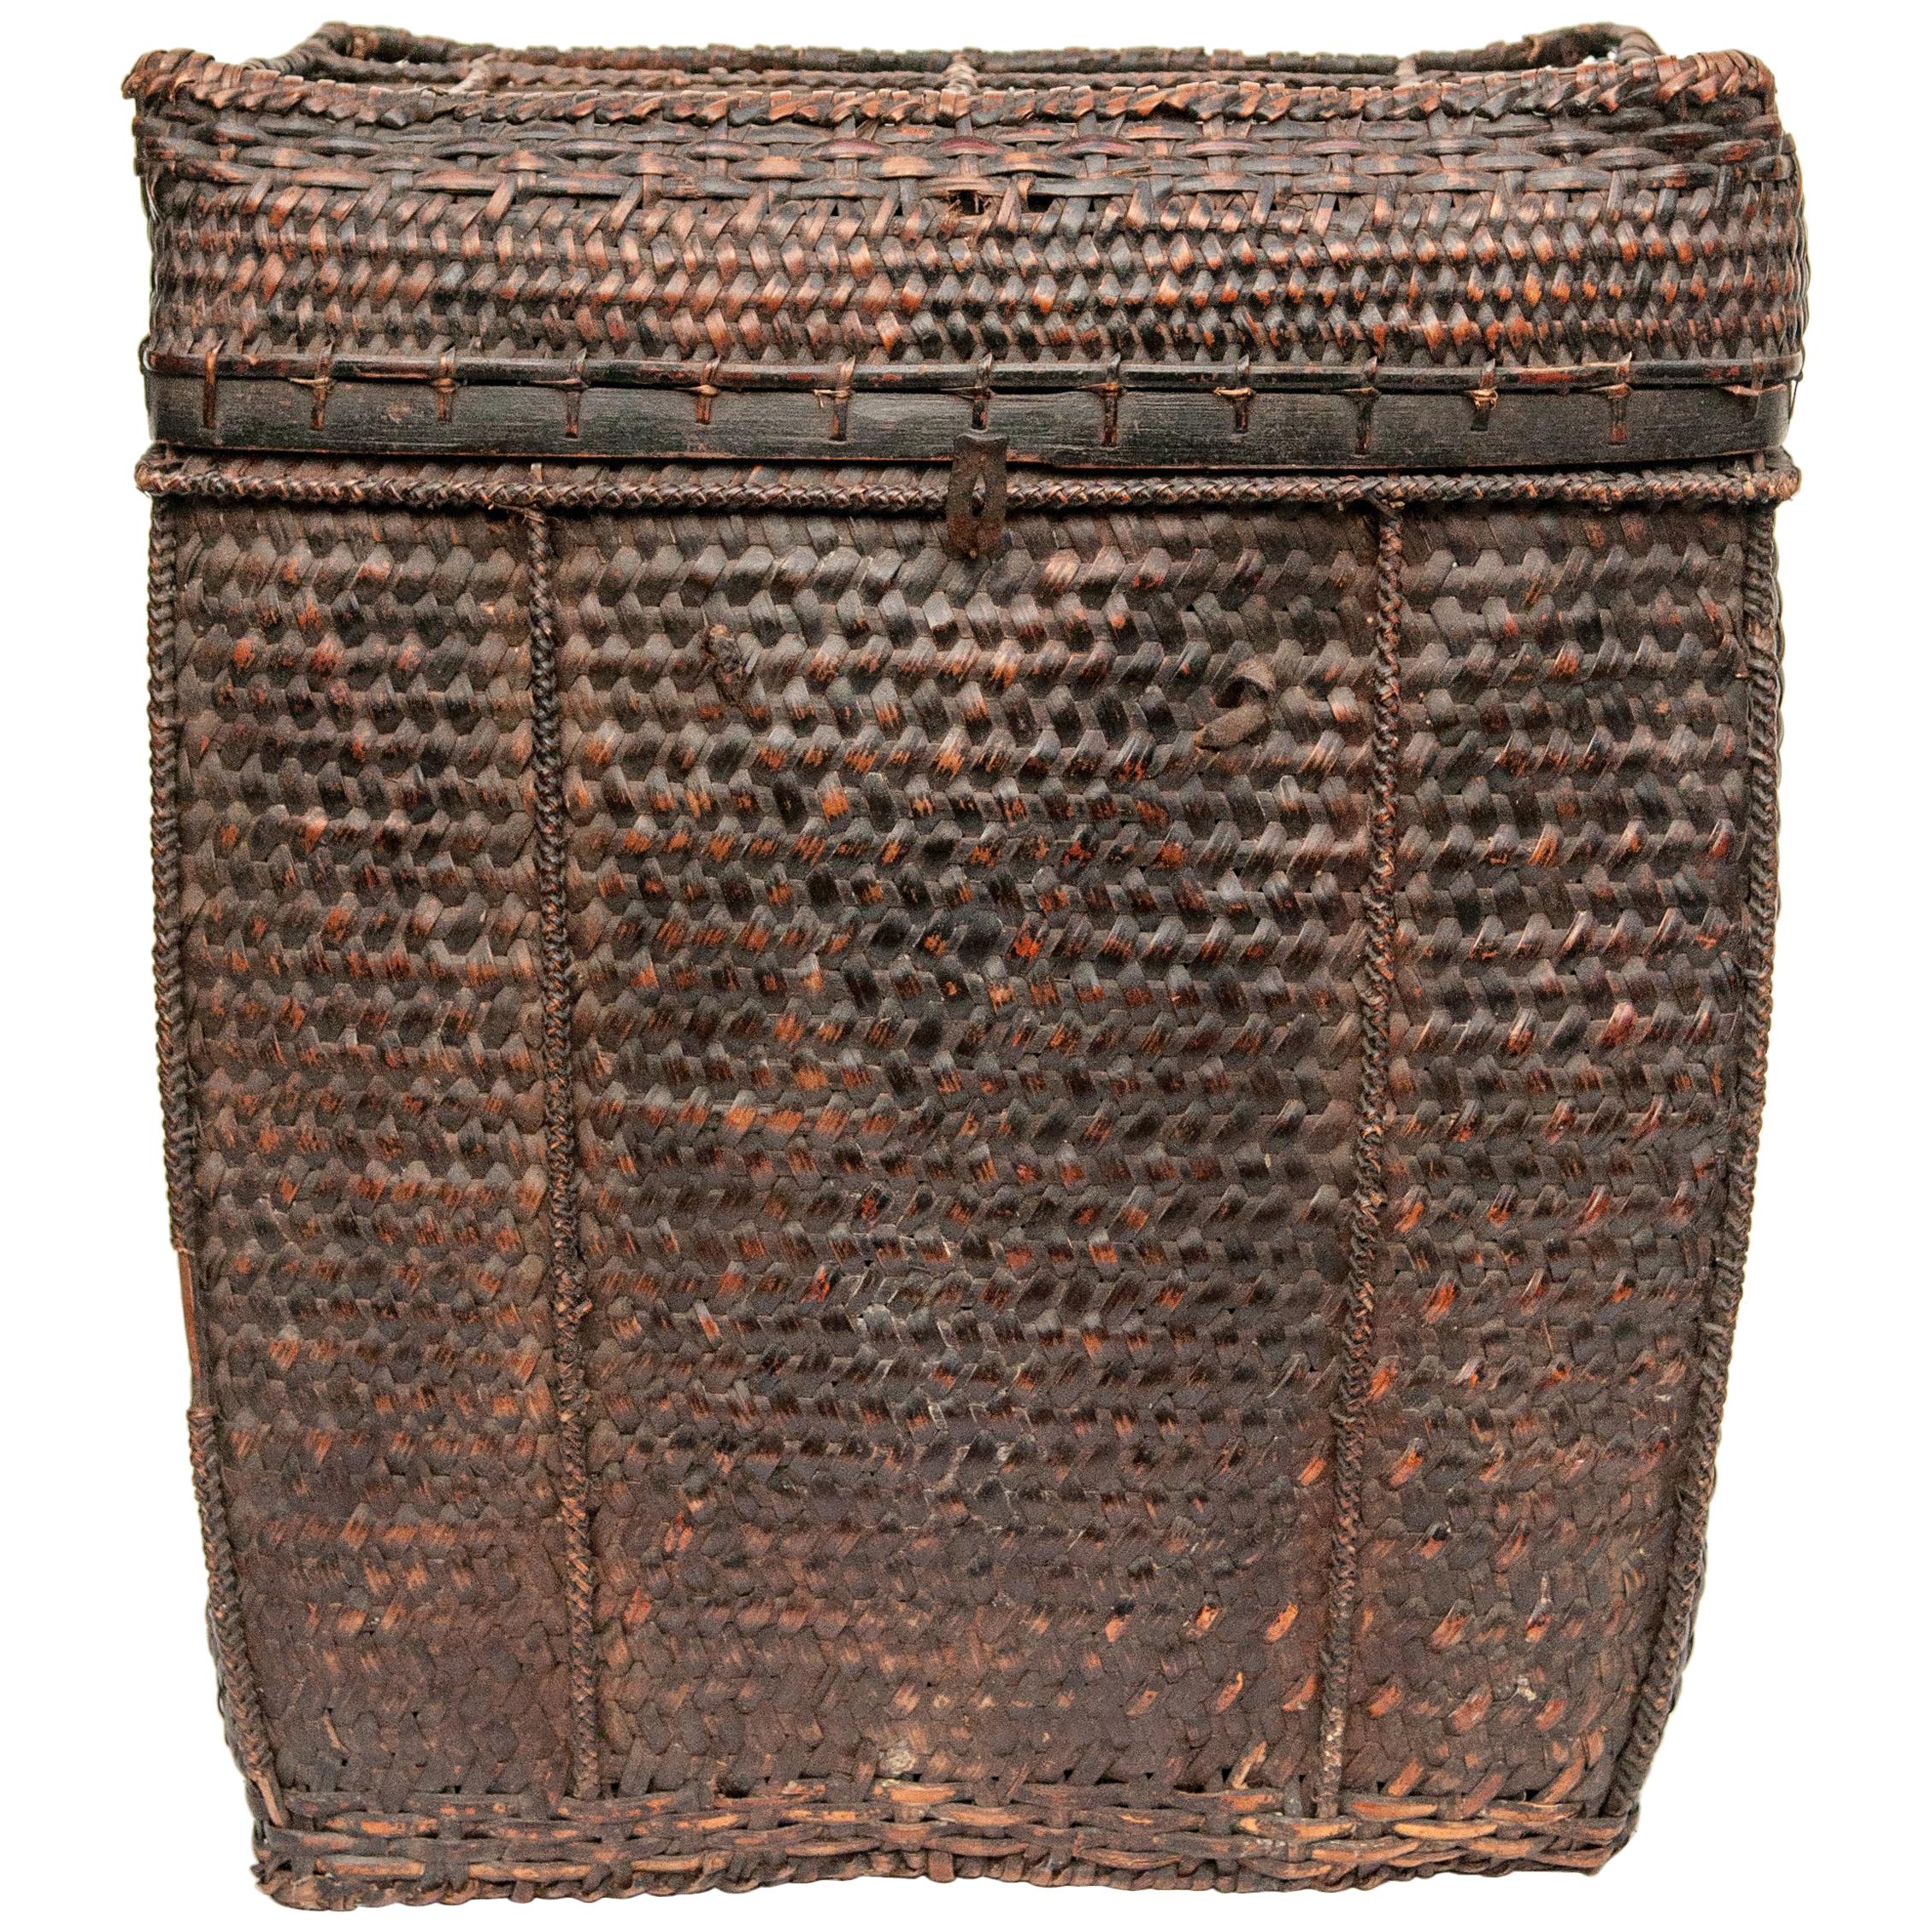 Large Vintage Tribal Storage Basket with Lid from Bhutan, Mid-Late 20th Century